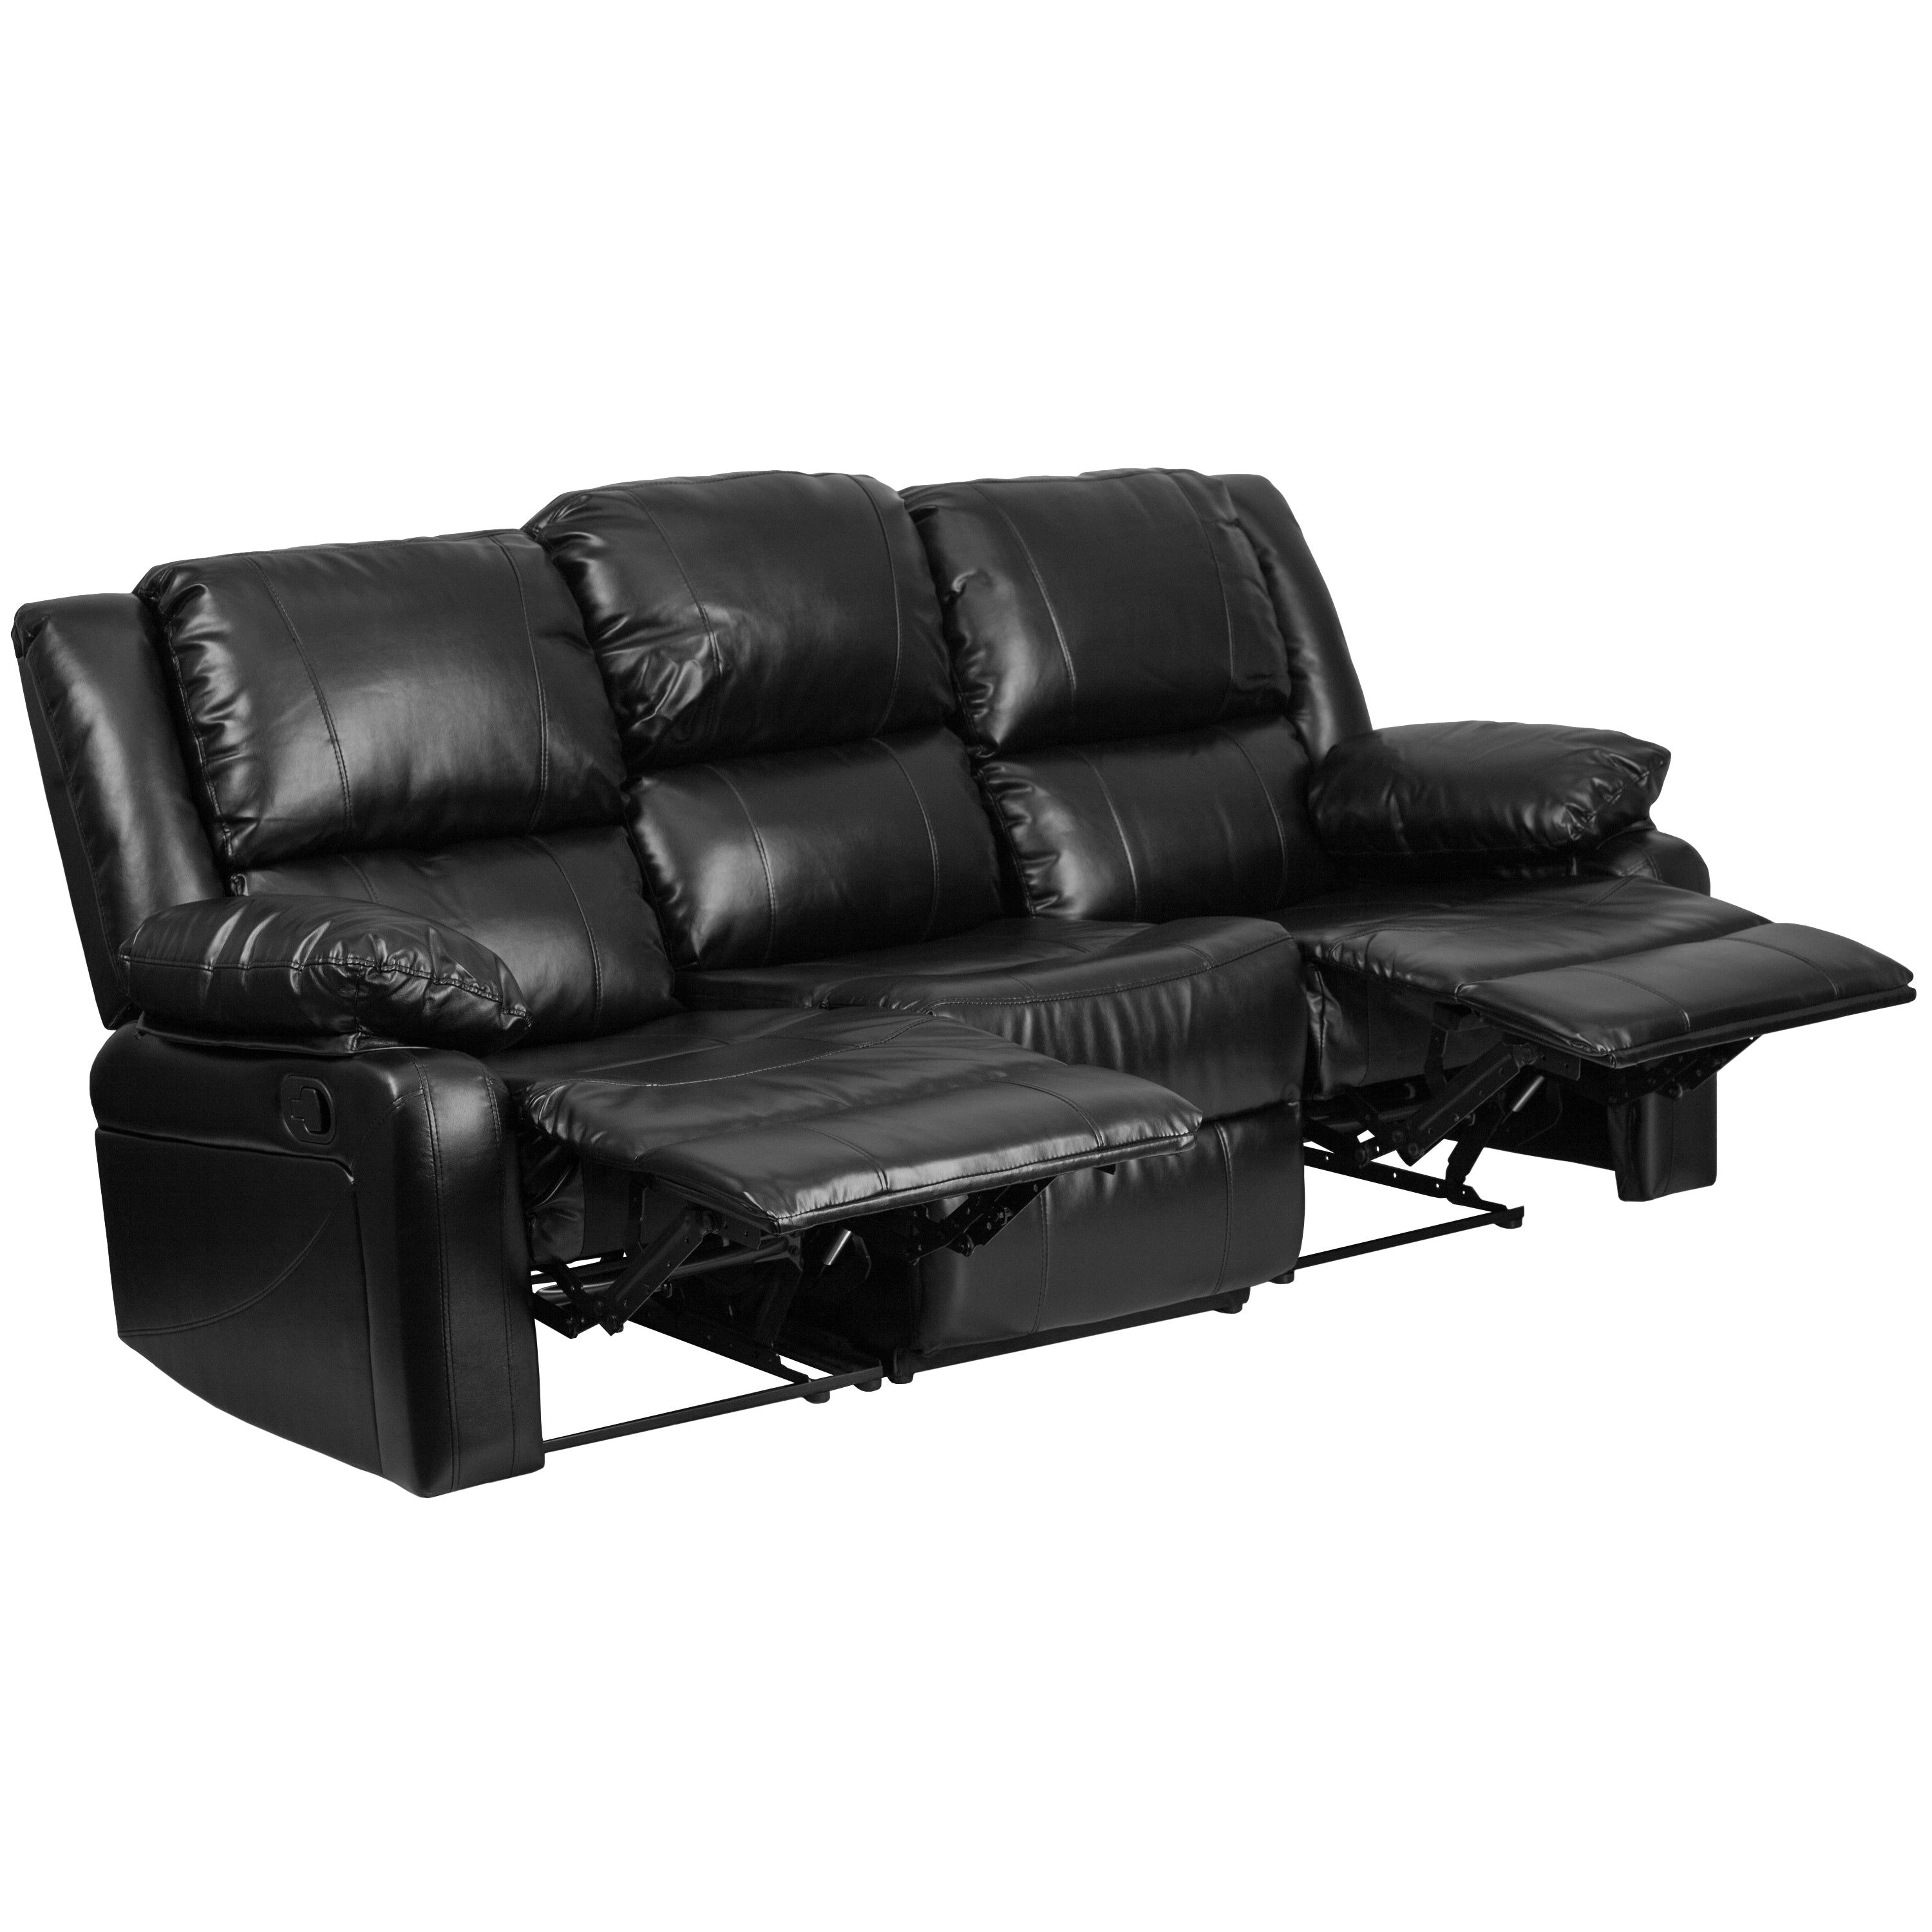 Harmony Series LeatherSoft Sofa with Two Built-In Recliners-Sofa-Flash Furniture-Wall2Wall Furnishings